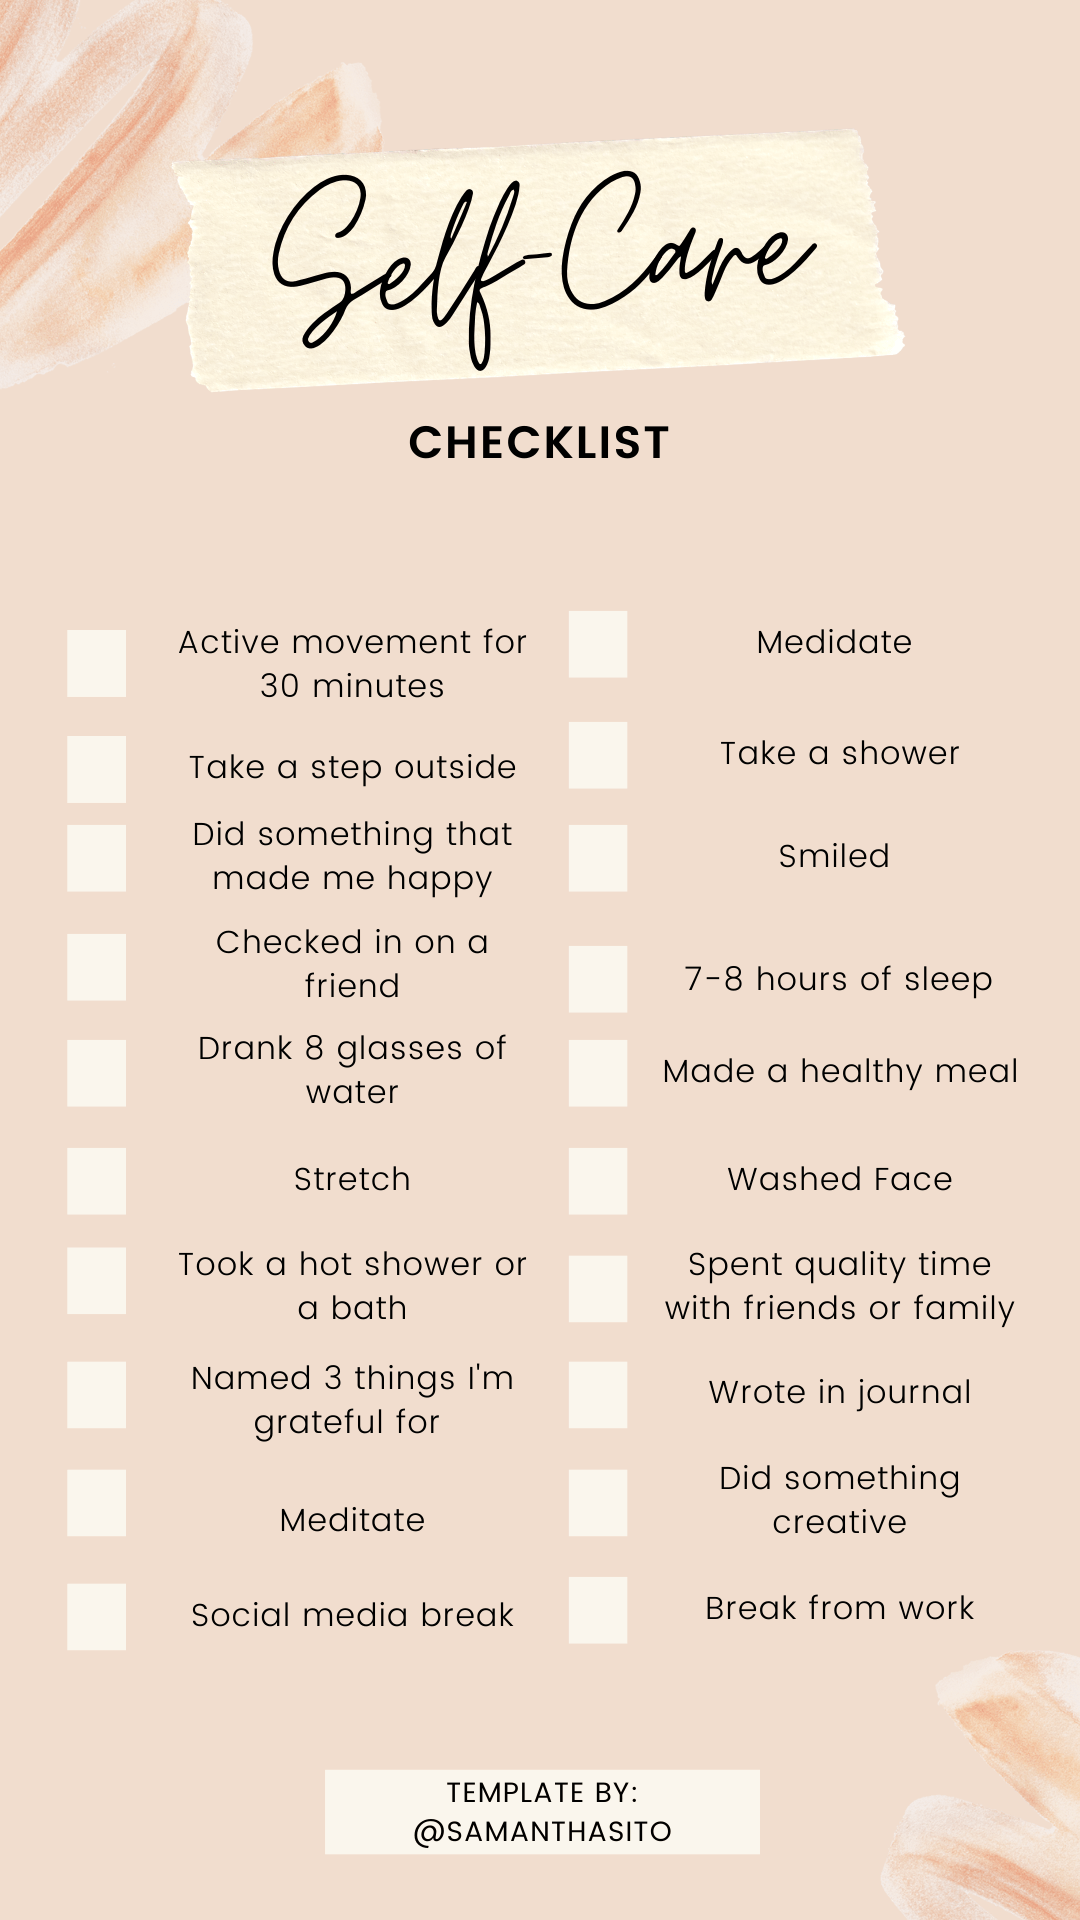 Self care checklist to help you overcome imposter syndrome